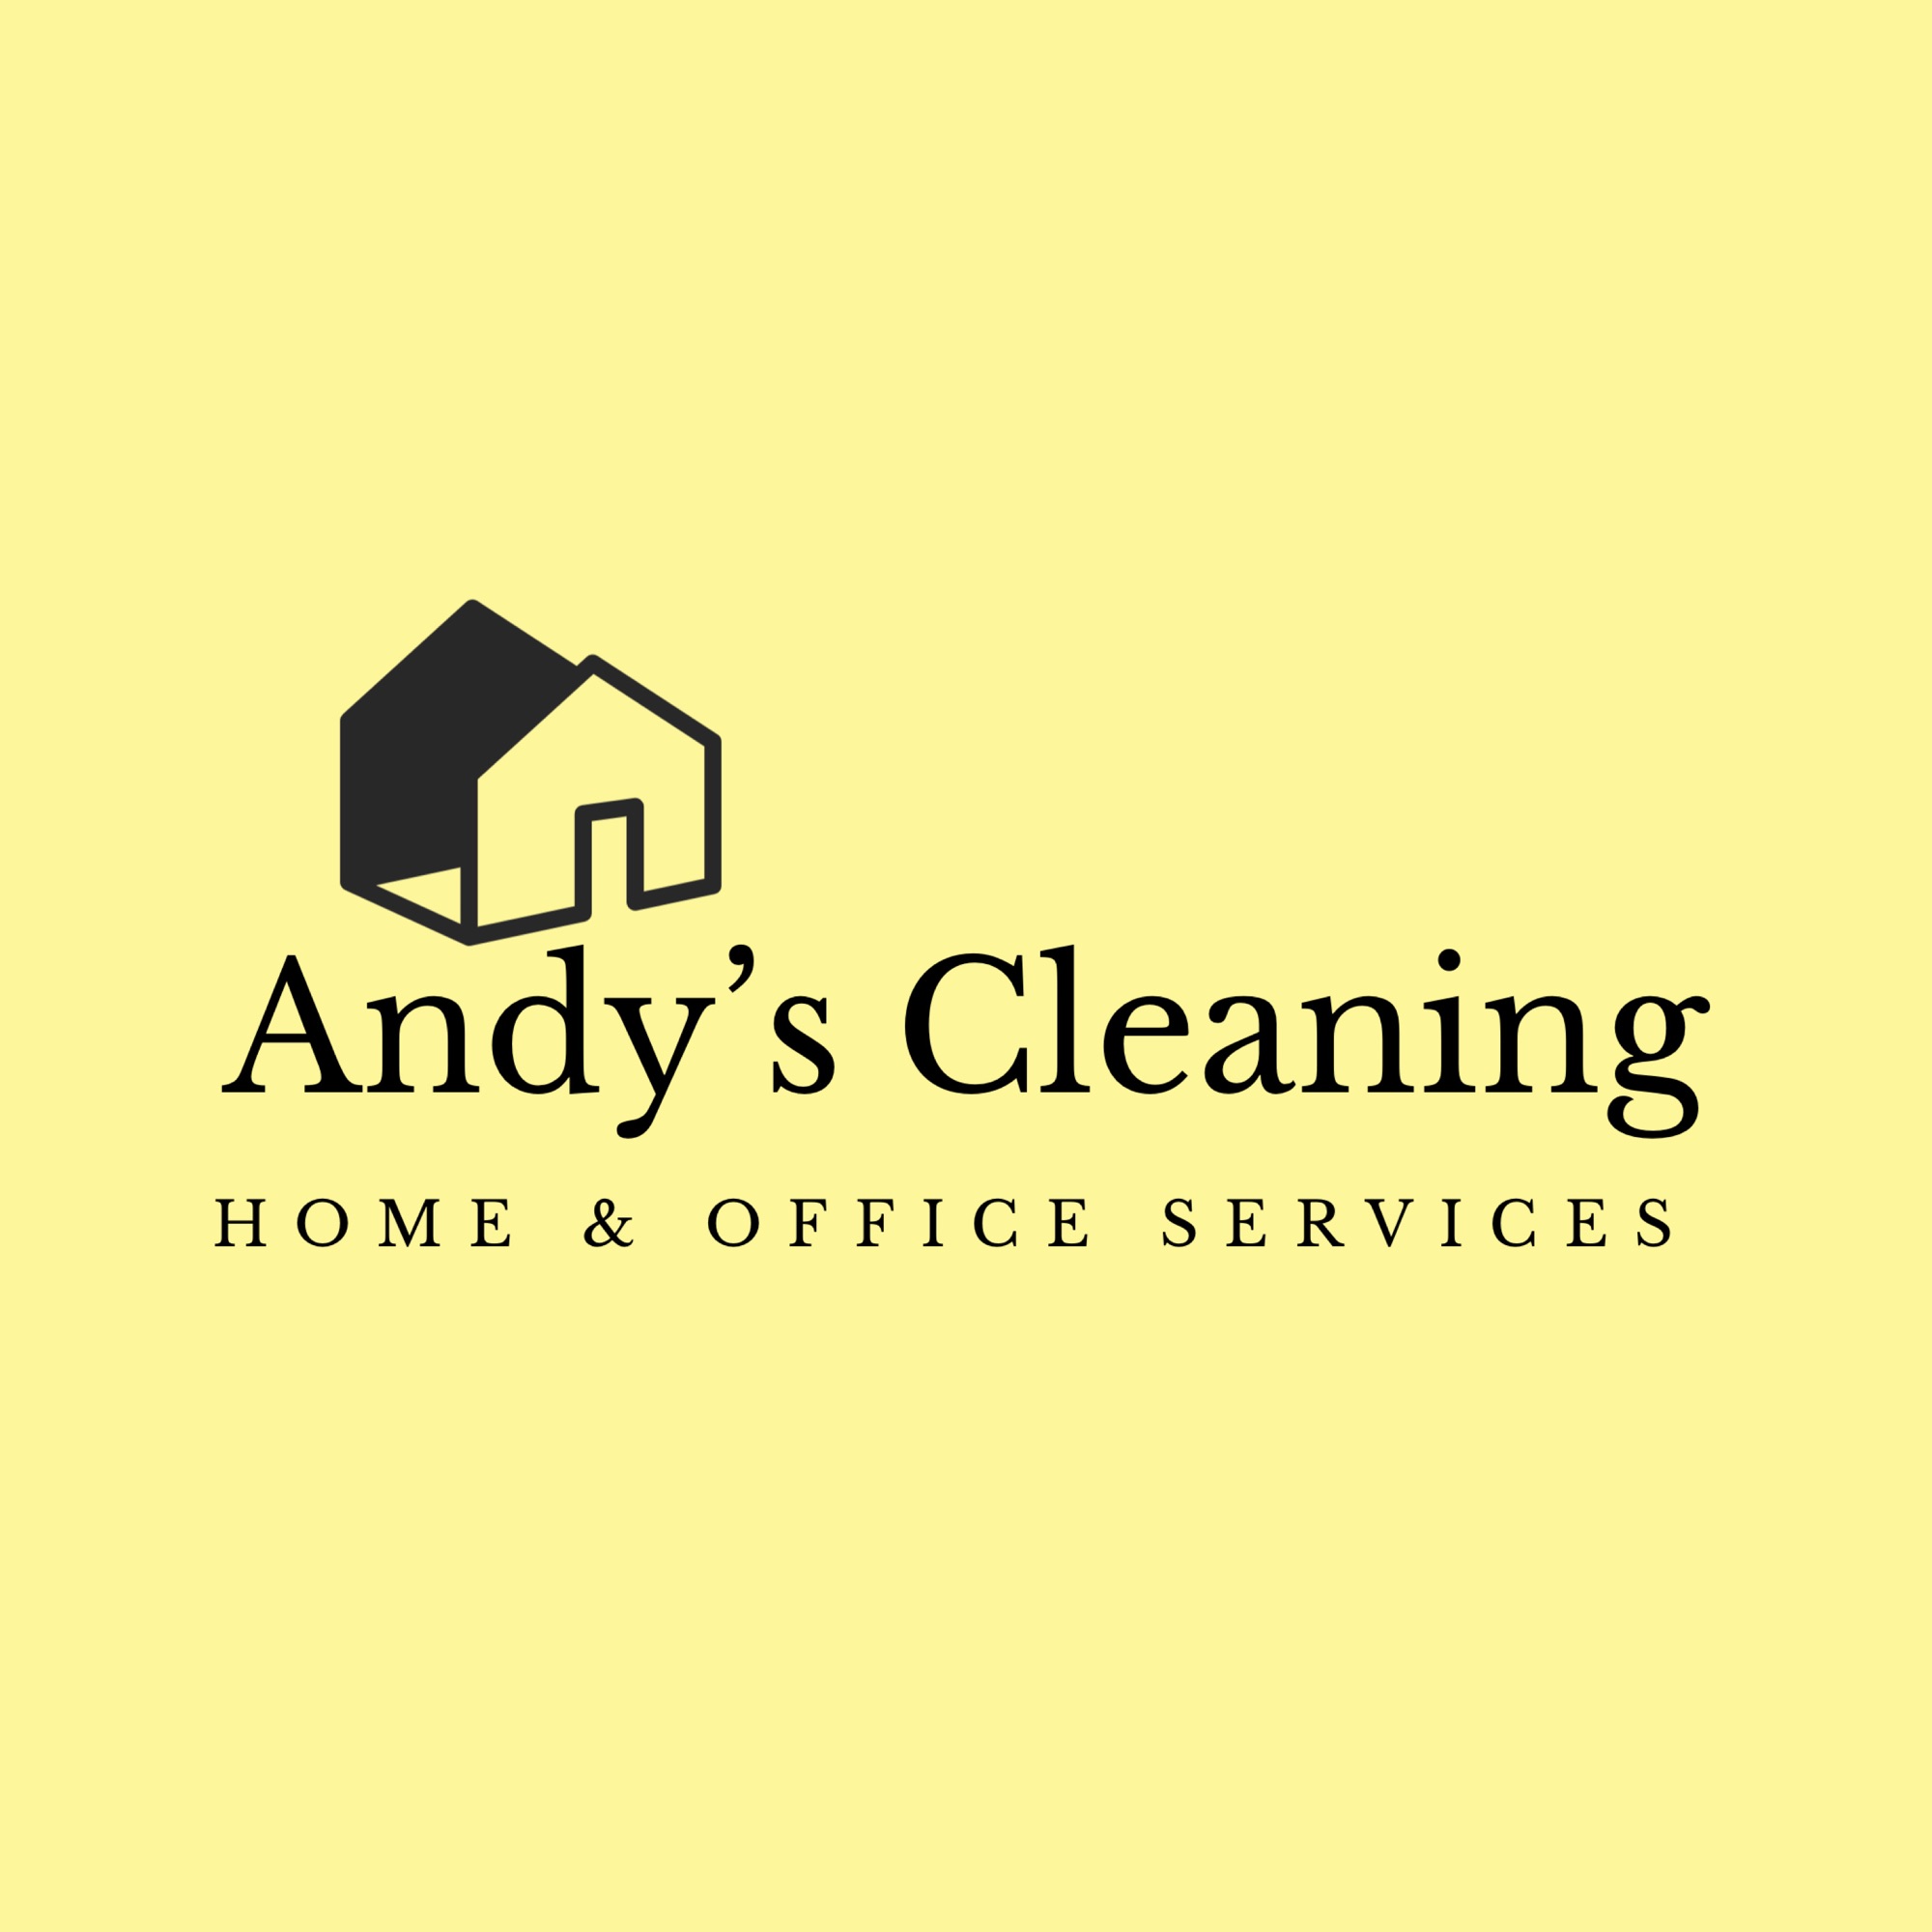 Andys Cleaning Service Logo